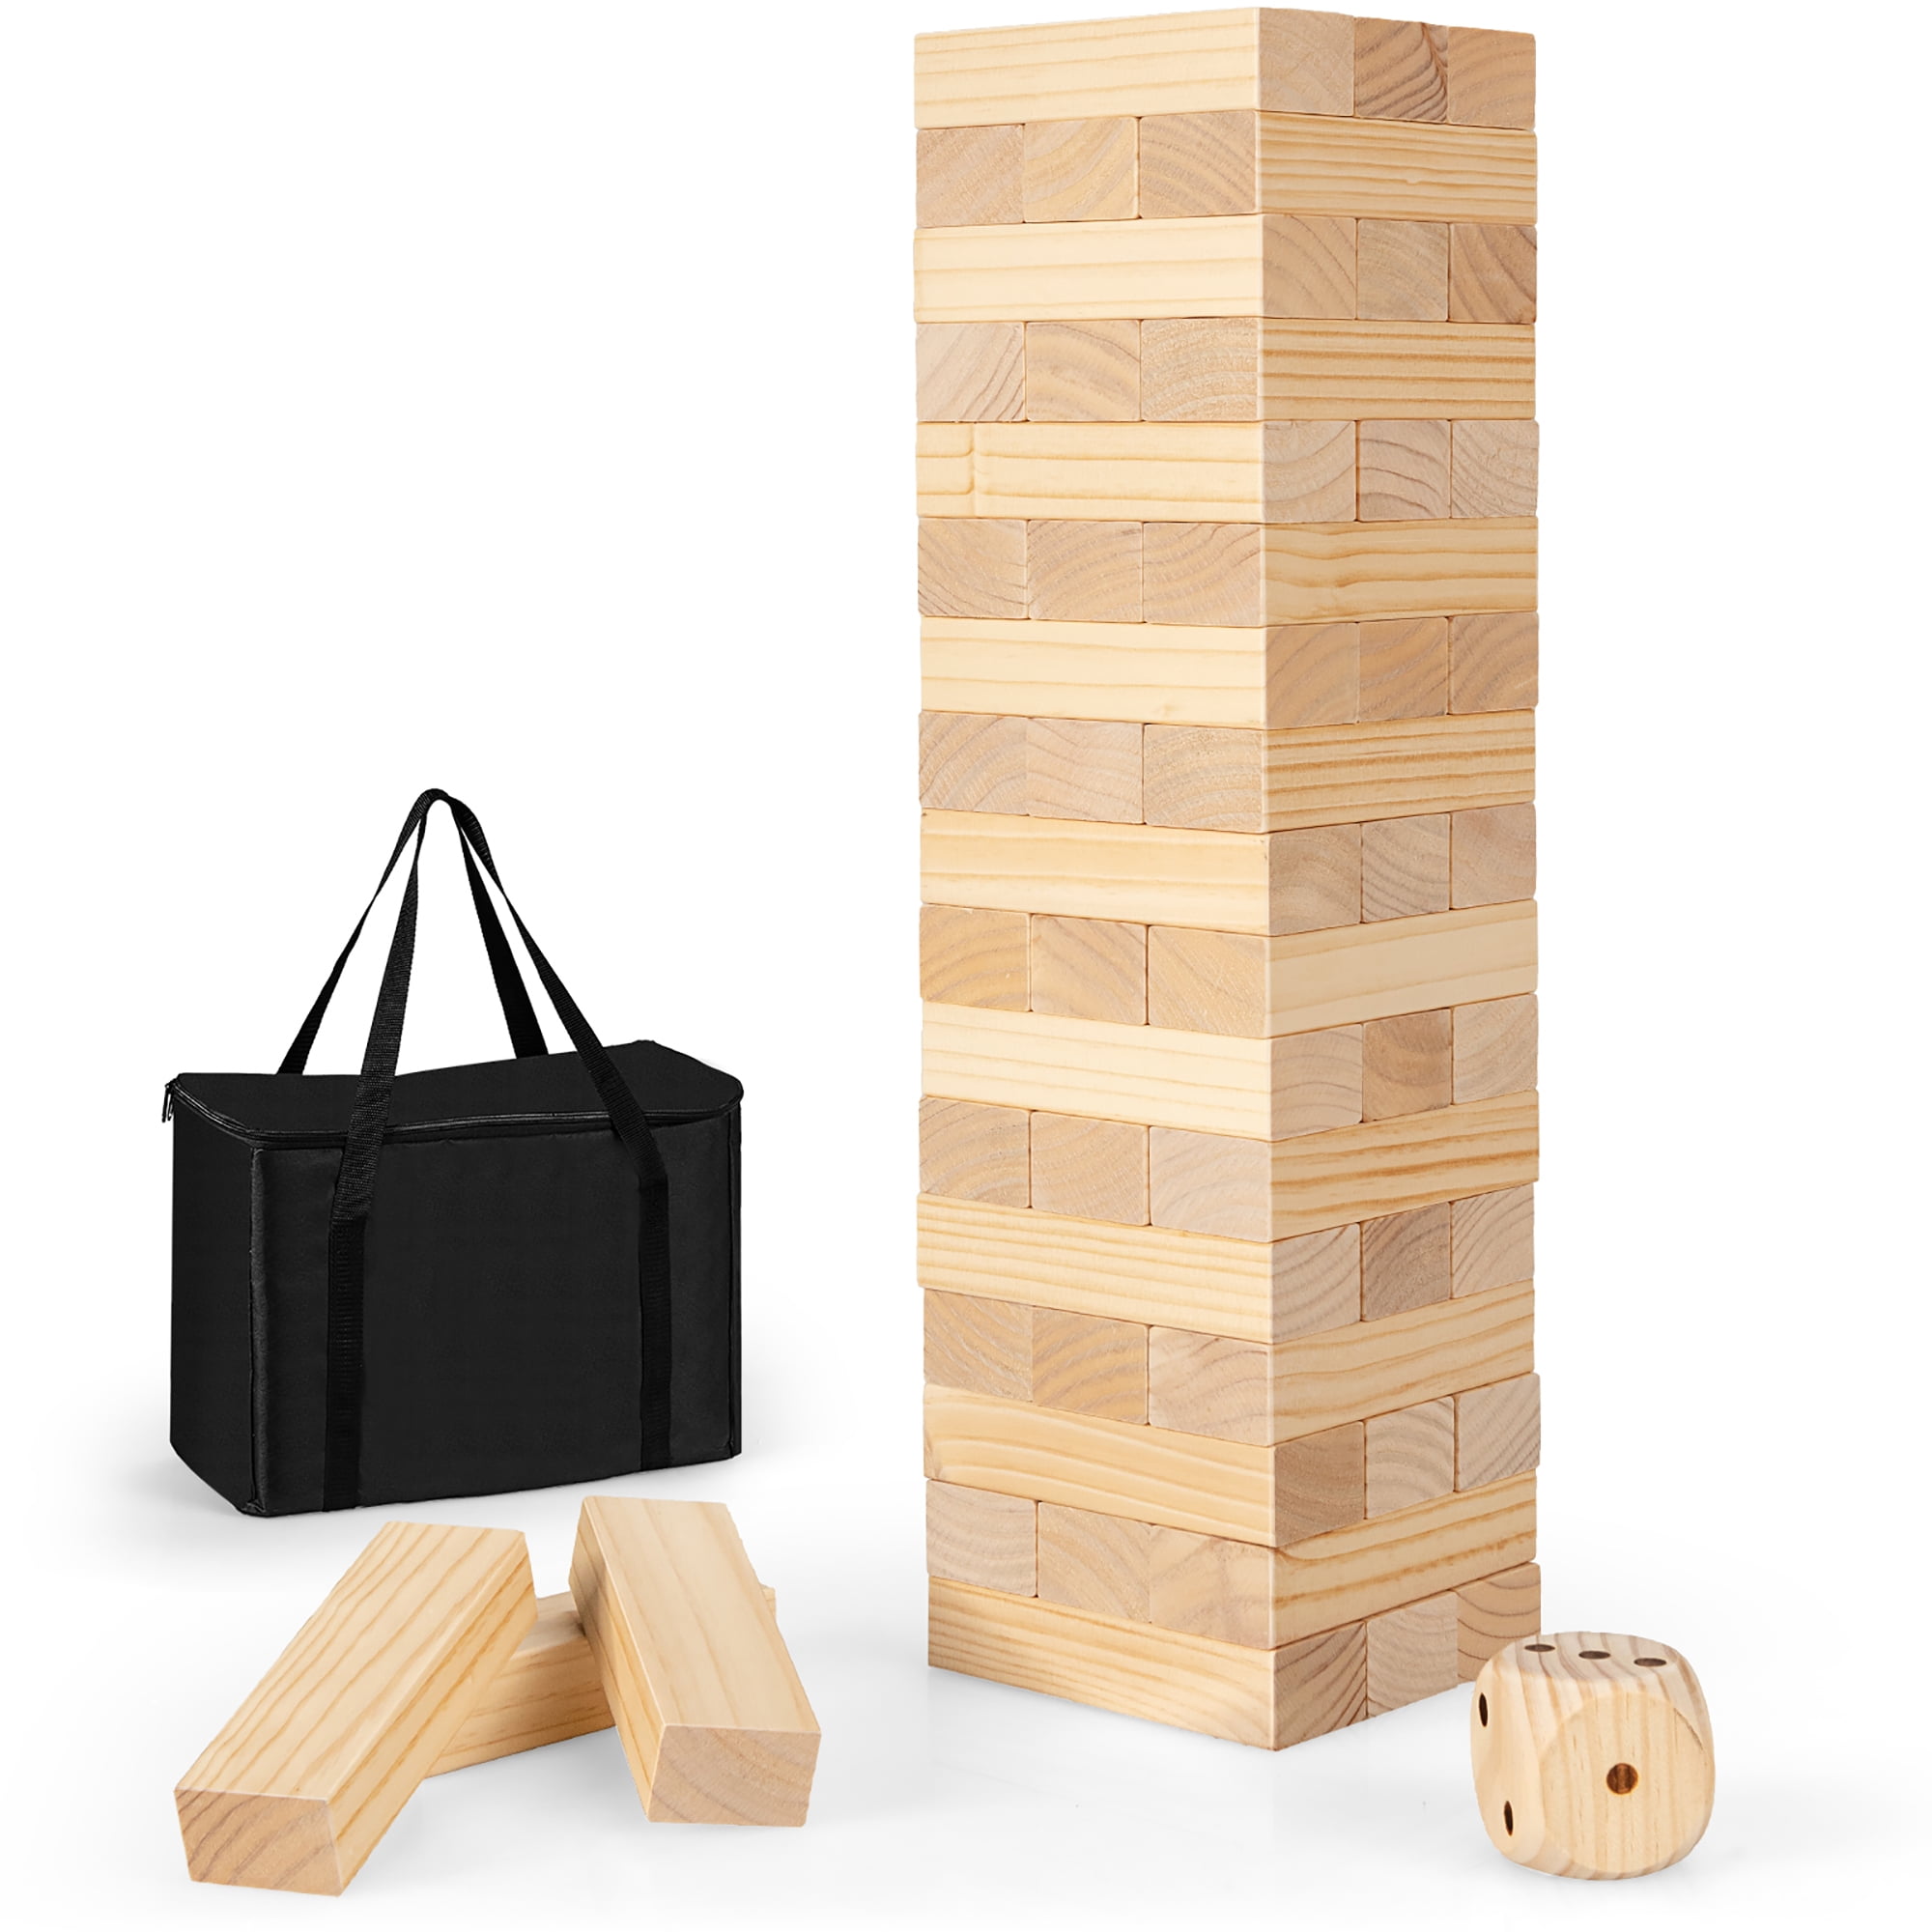 Dice Life Size Yard Tower Giant Tumbling Timber Toy Grows from 1.75-feet to Almost 4-feet While Playing Jumbo JR Premium Pine Wood Floor Game for Kids&Adults 54-Pc Wooden Blocks Carry Bag